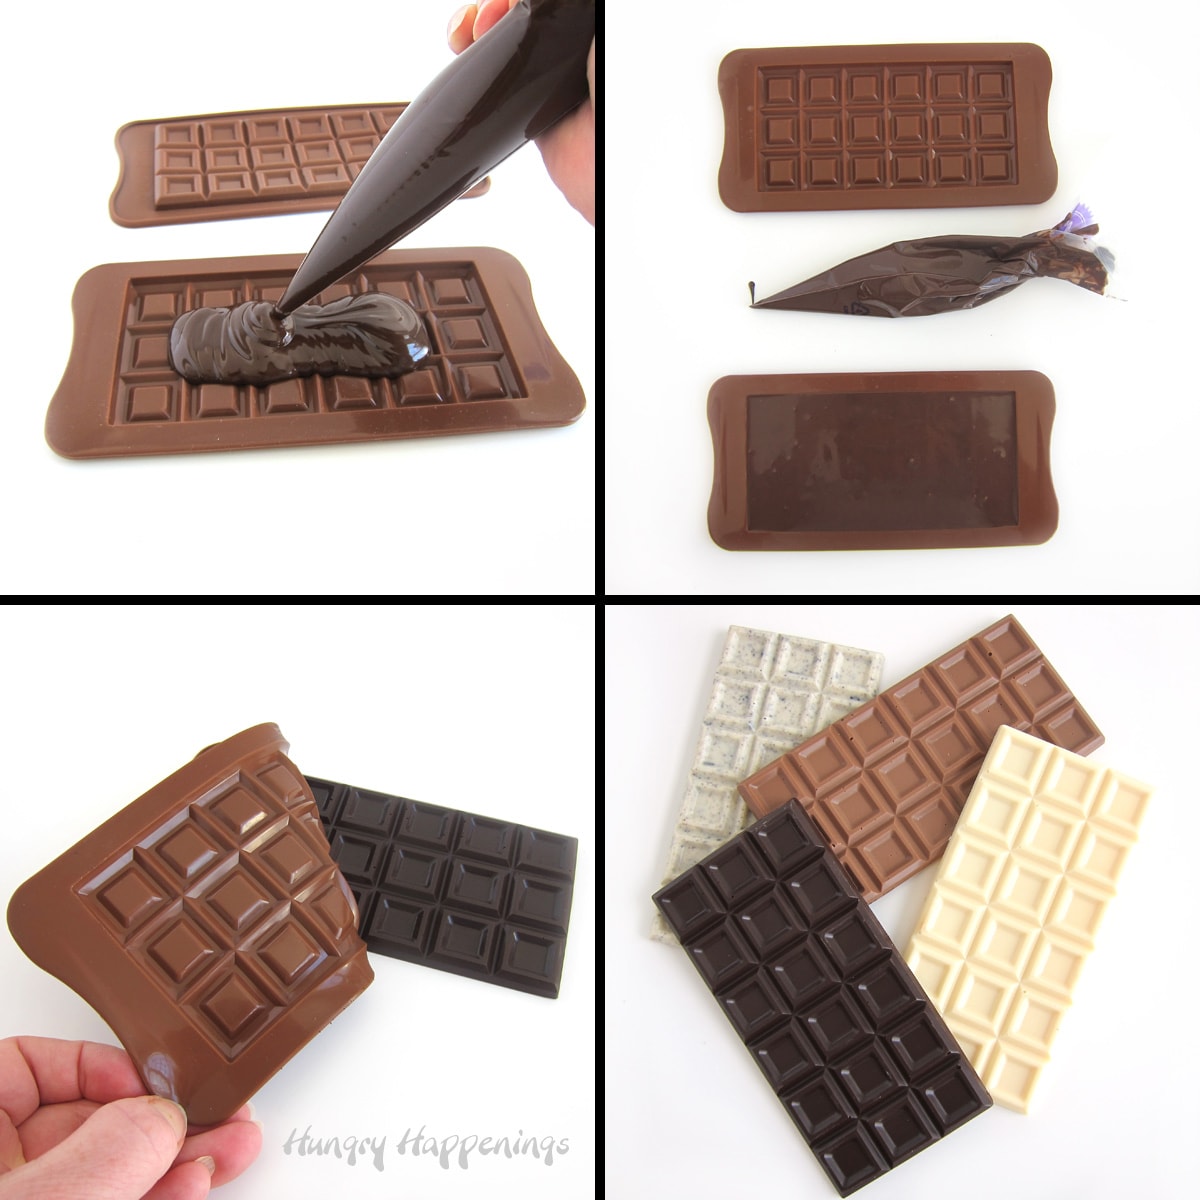 pipe chocolate into a silicone candy bar mold, chill to harden, then unmold the chocolate bars